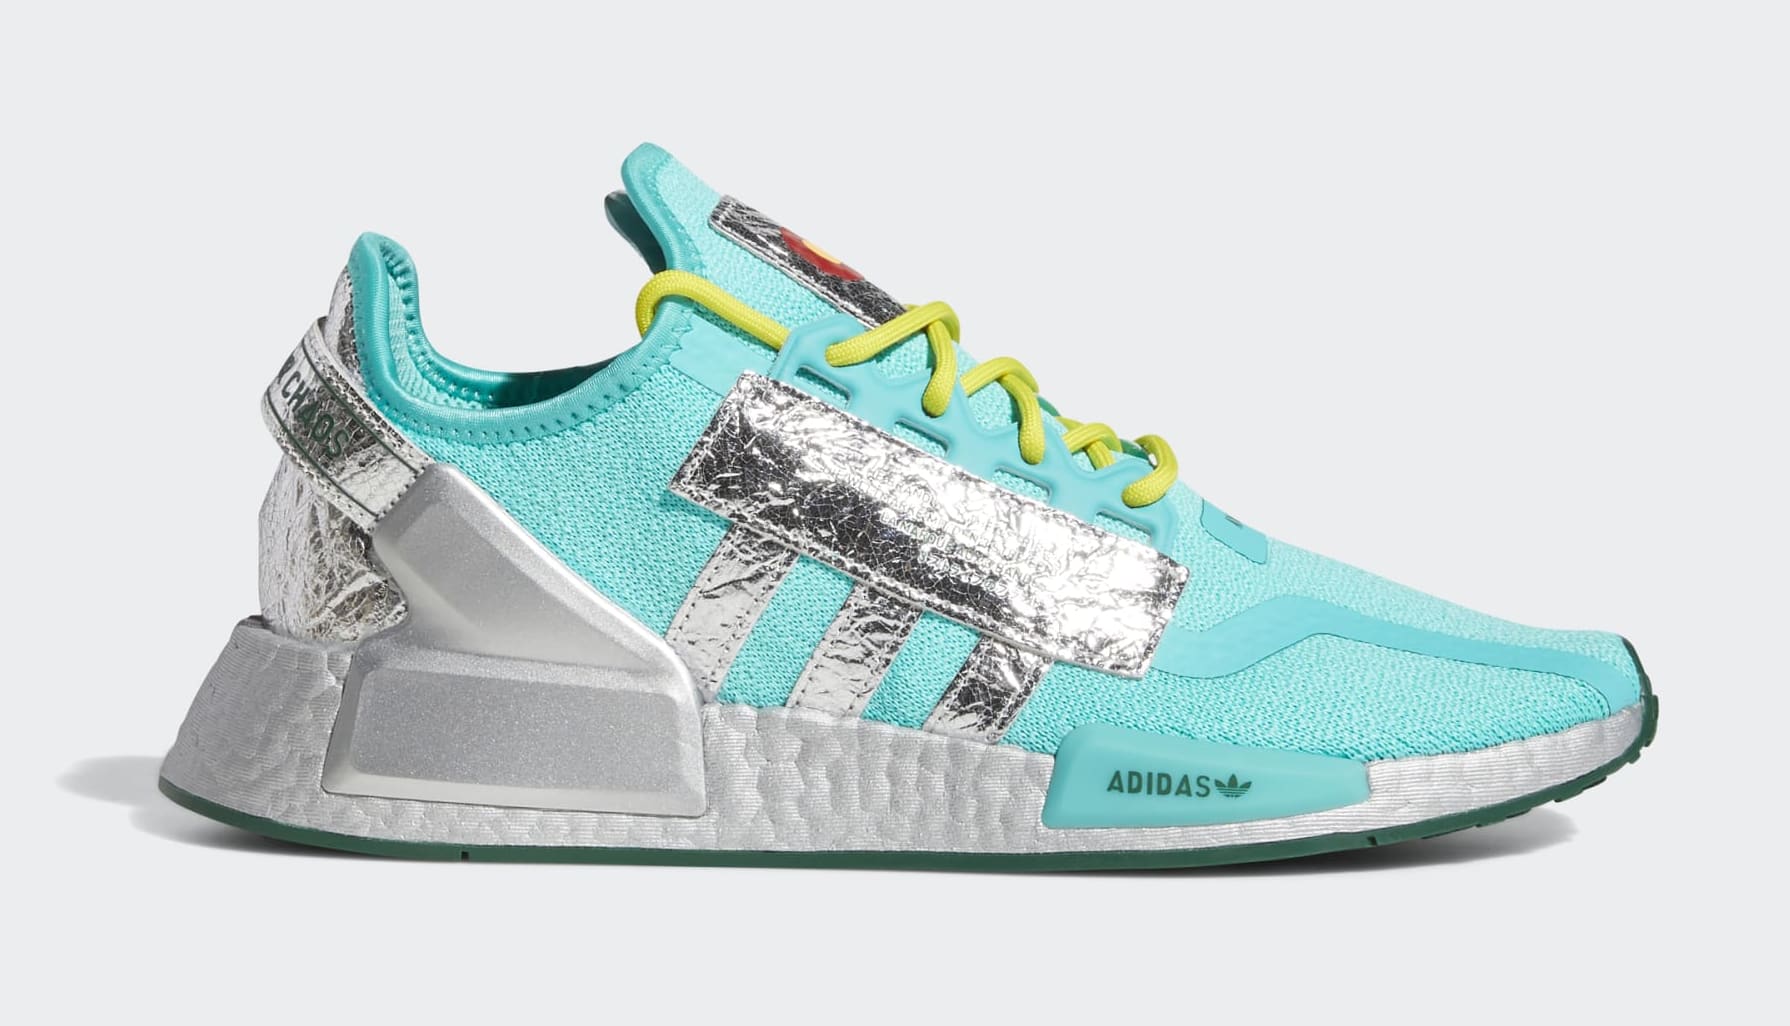 South Park x Adidas NMD_R1 GY6477 Lateral